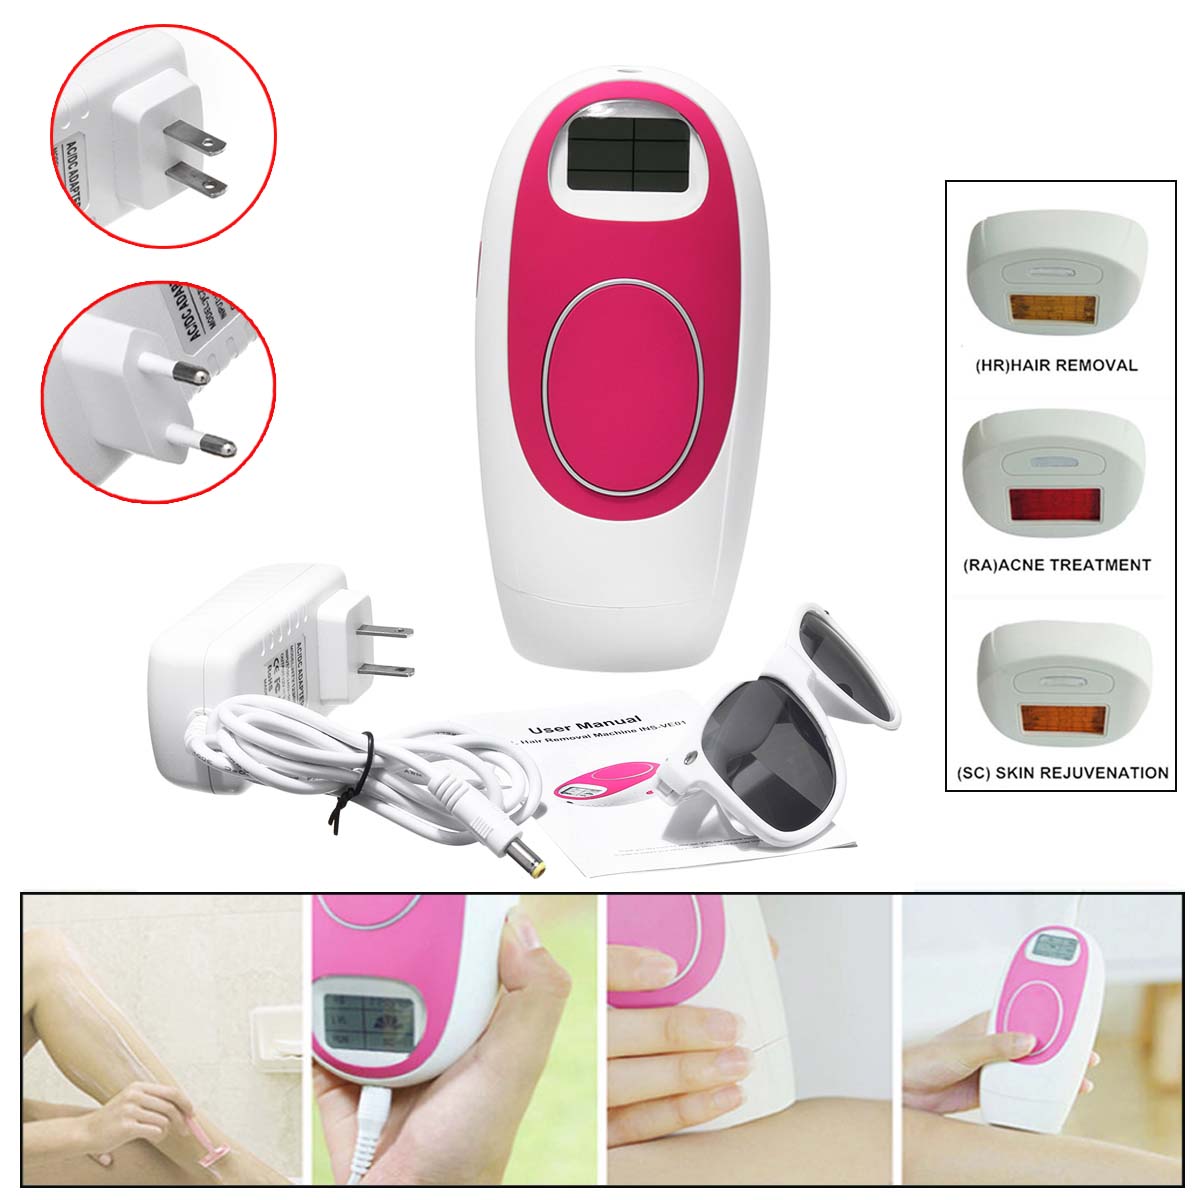 Replacement Lamp For Laser IPL Permanent Hair Removal Machine For Face and Body